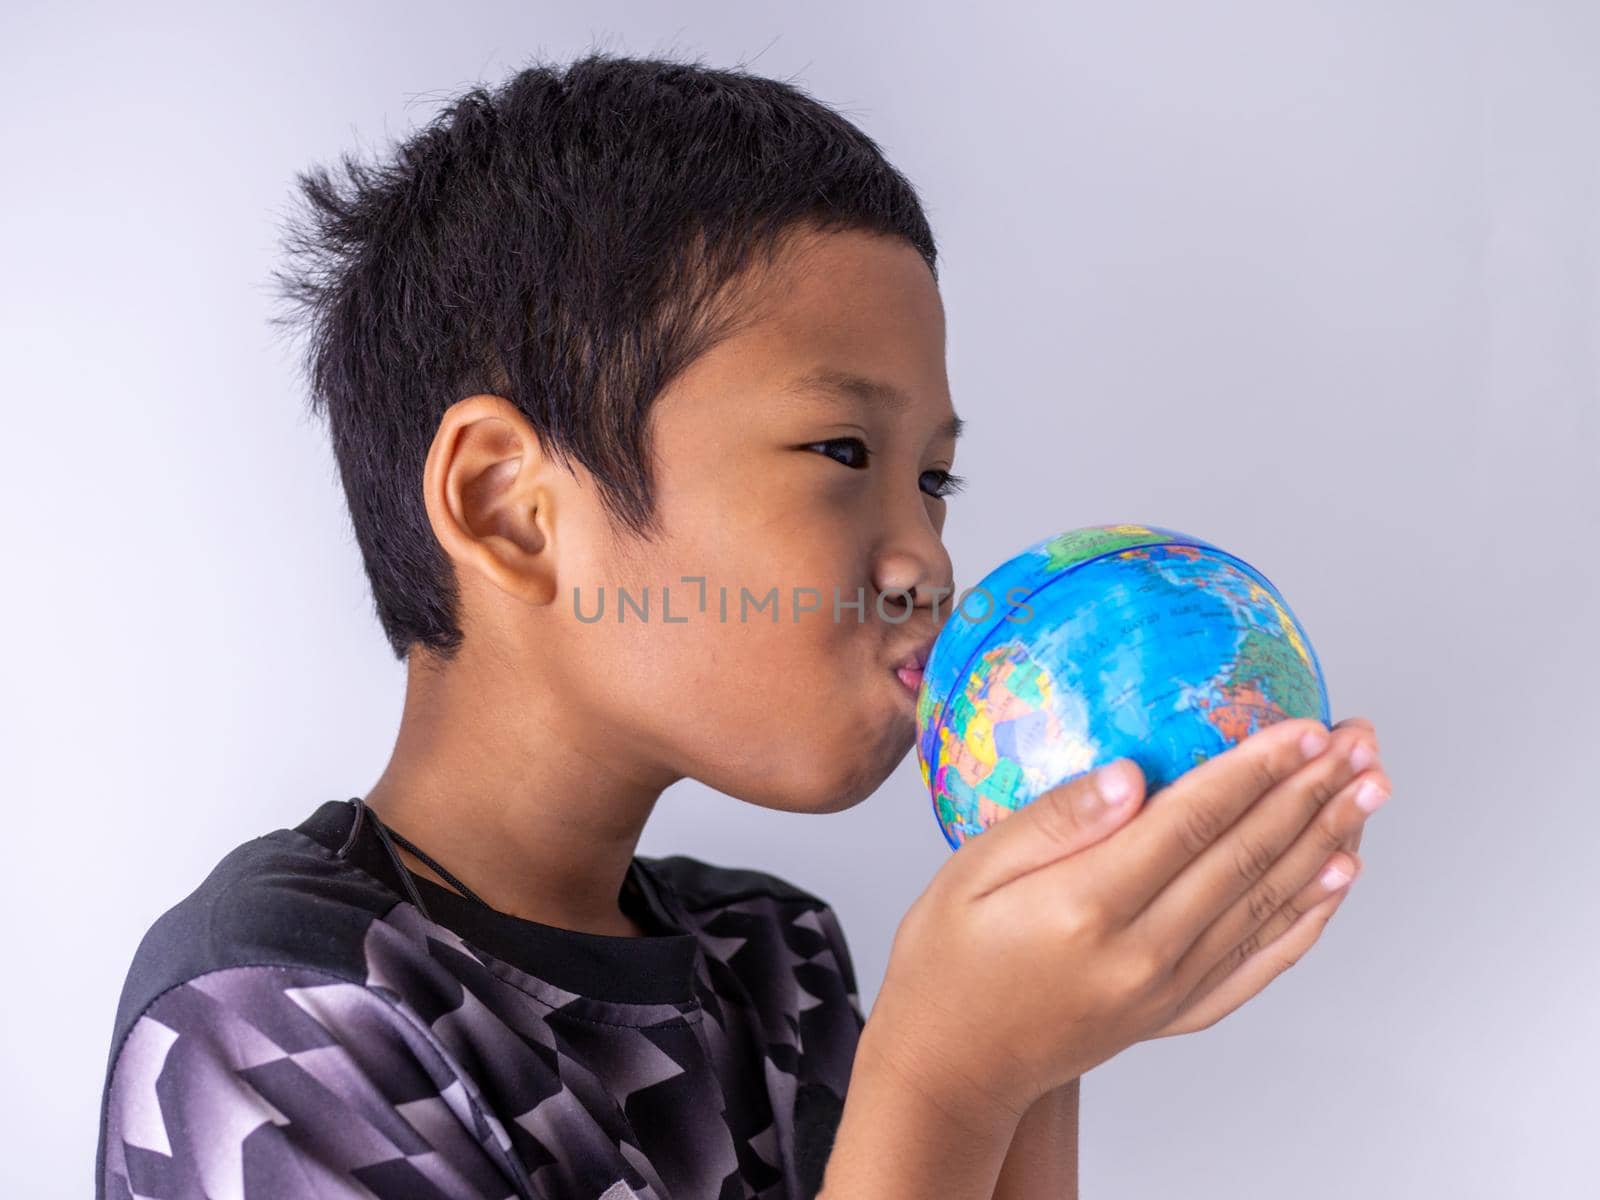 A boy hands the globe and kisses it on the globe. Show the power of the new generation to continue to develop our world.